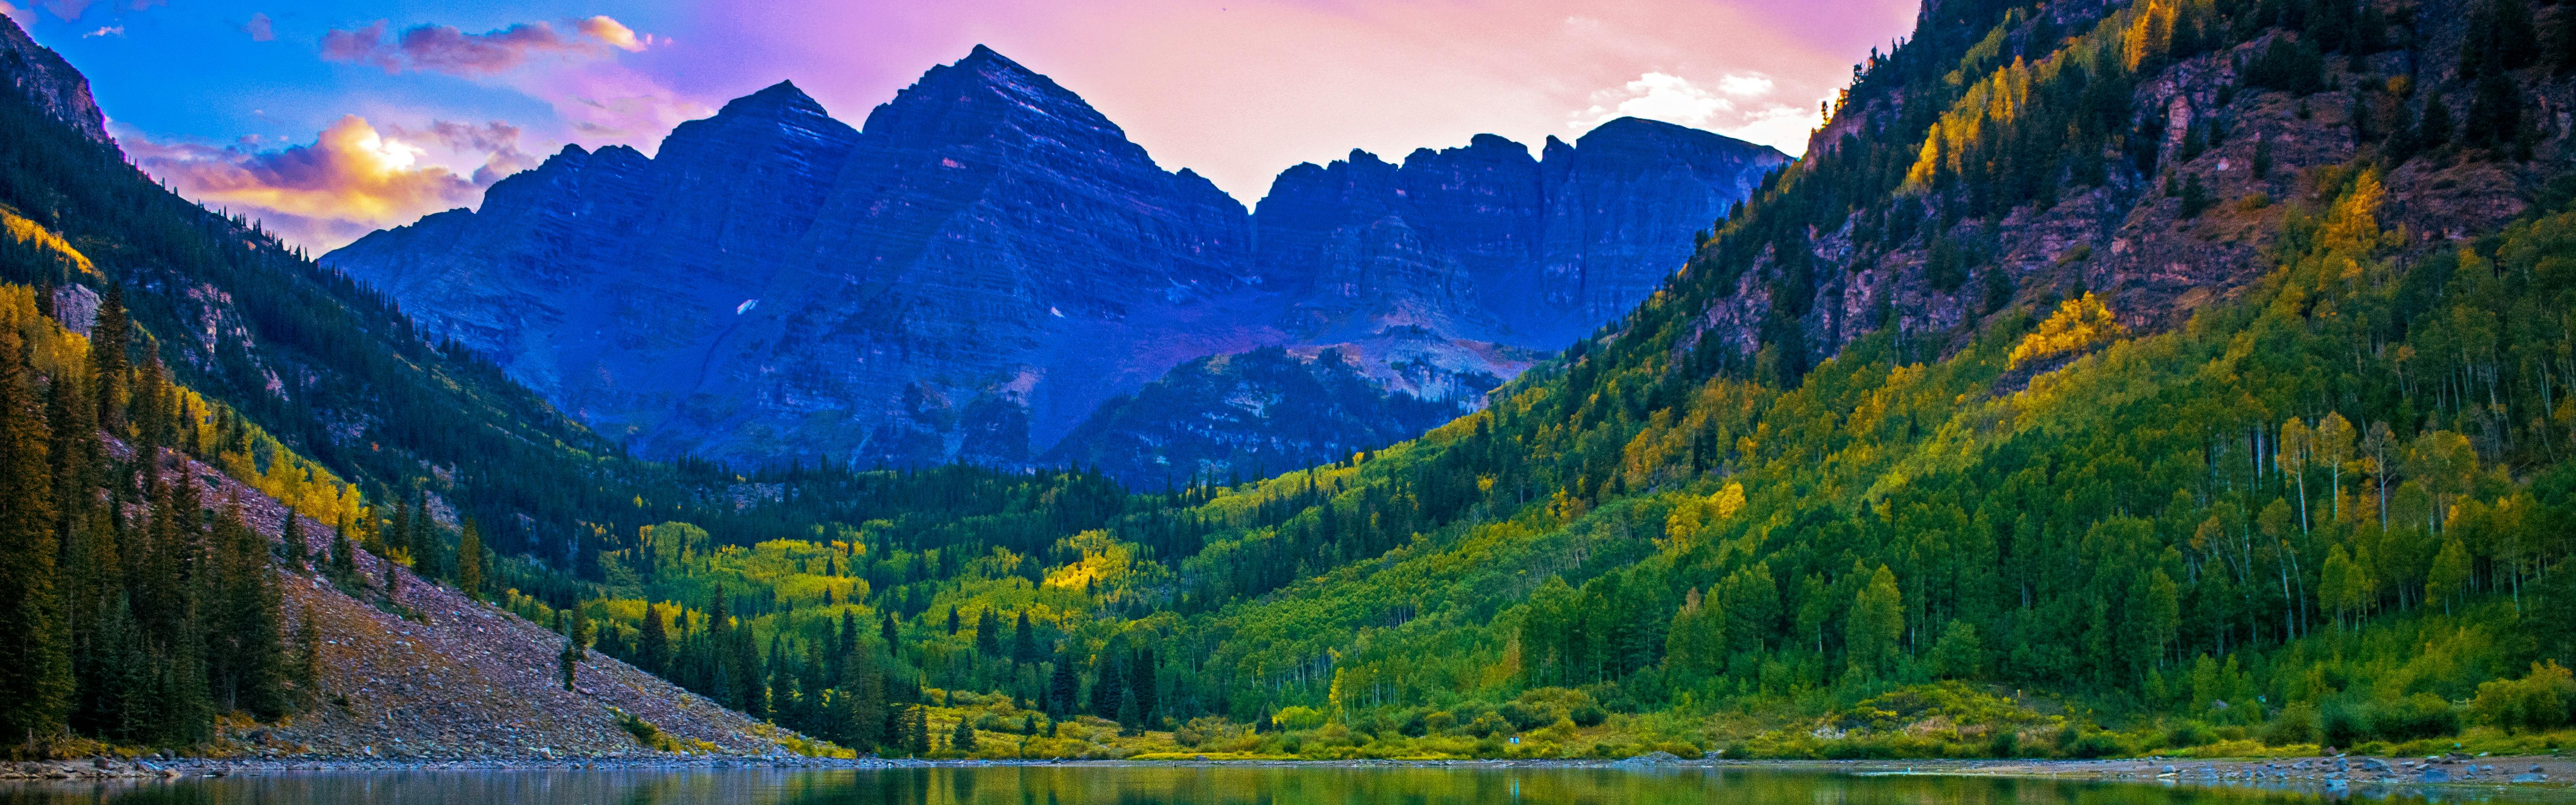 A lake sits at the base of massive mountains. The sky is pink and blue above. 